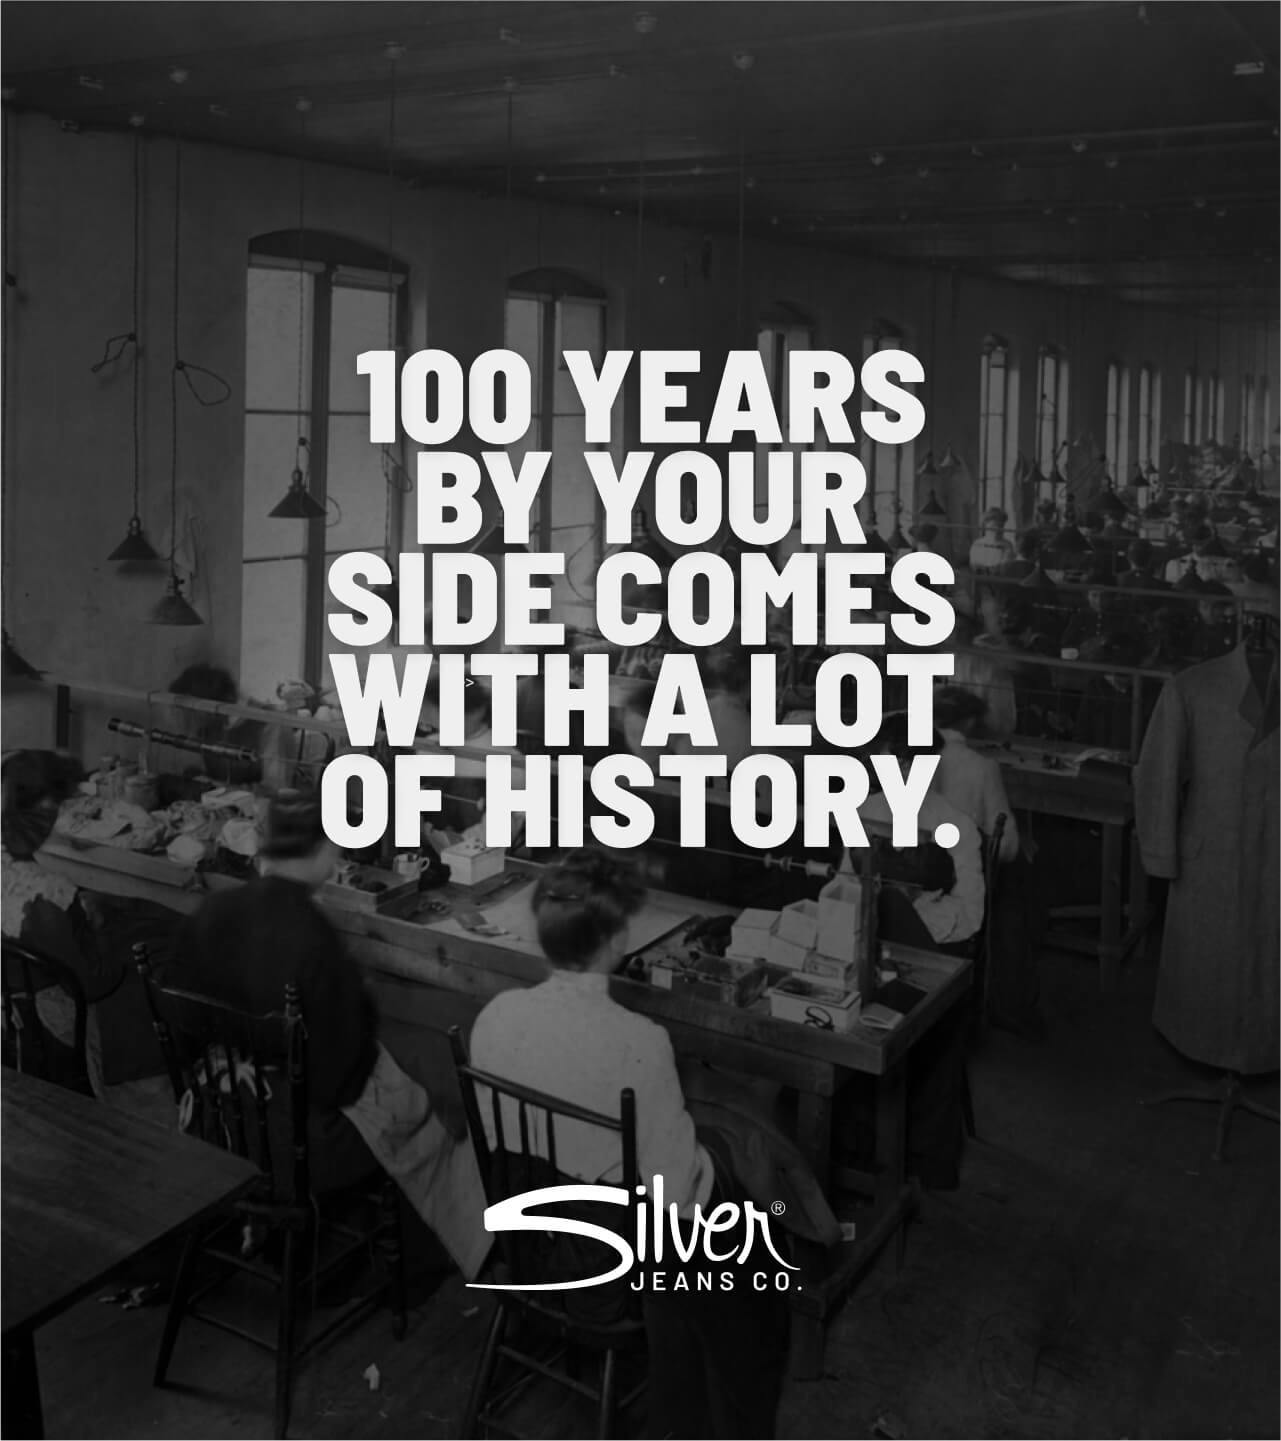 100 years by your side comes with a lot of history.